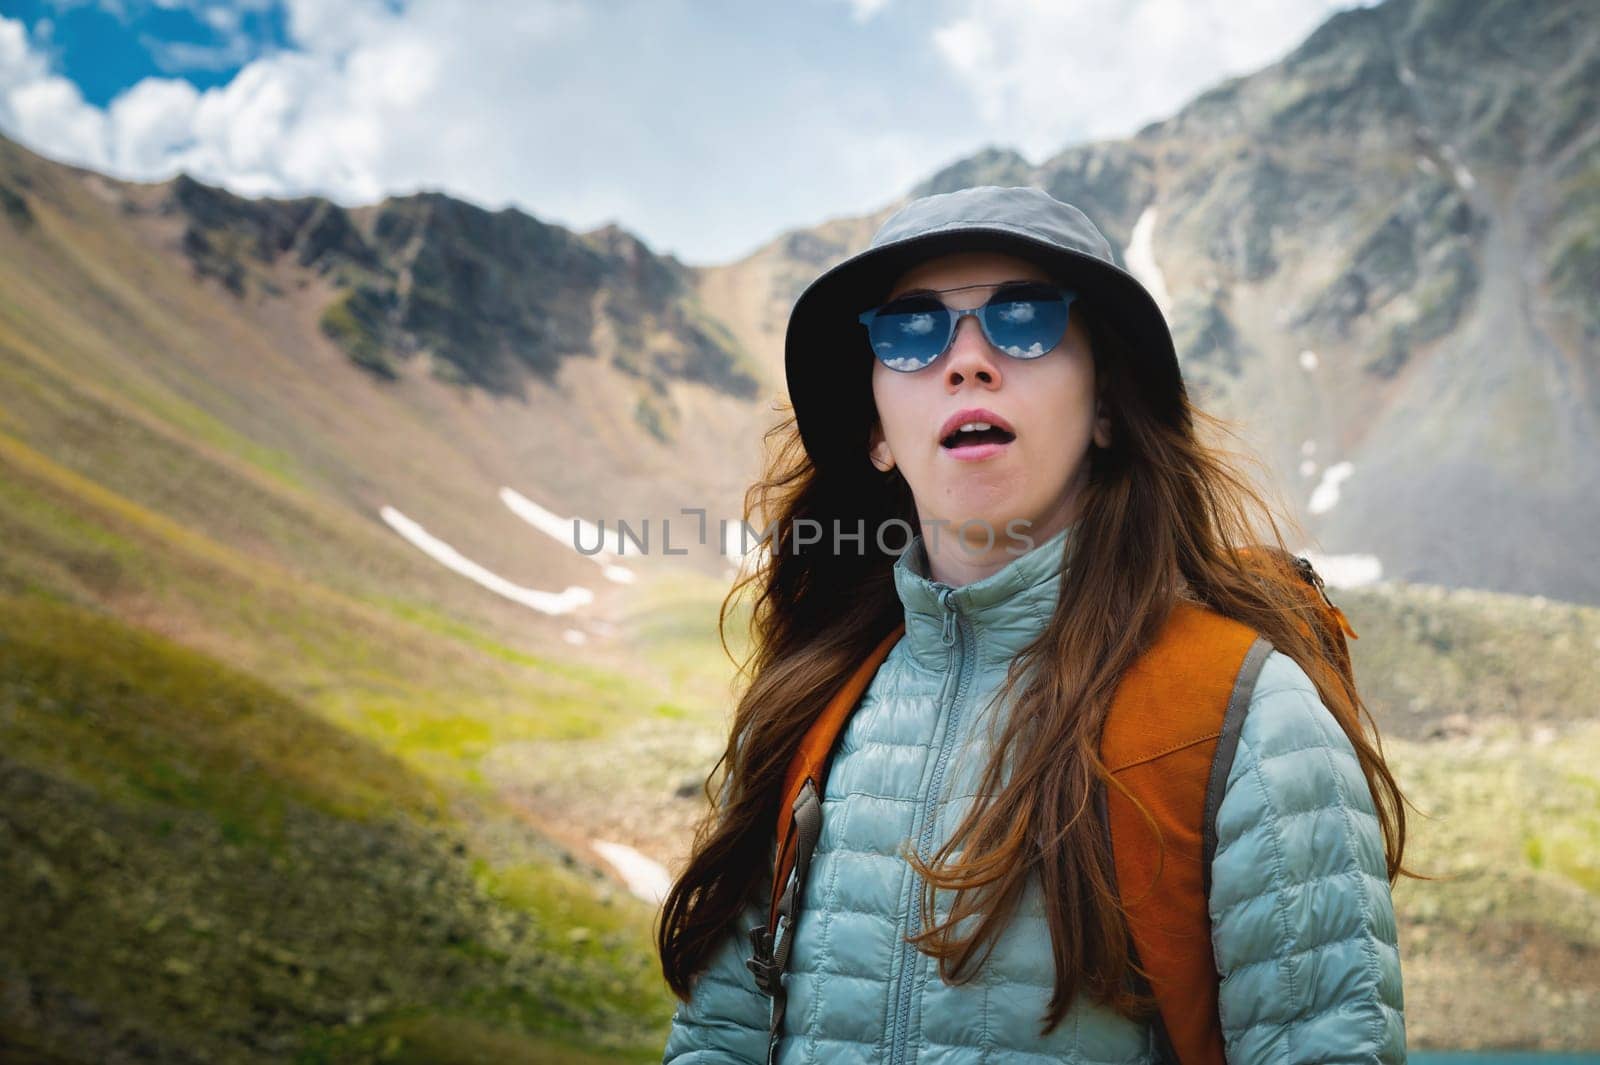 Young beautiful woman yawns. Portrait of a yawning woman on a sunny morning in the mountains. Summer trekking, healthy active lifestyle concept.